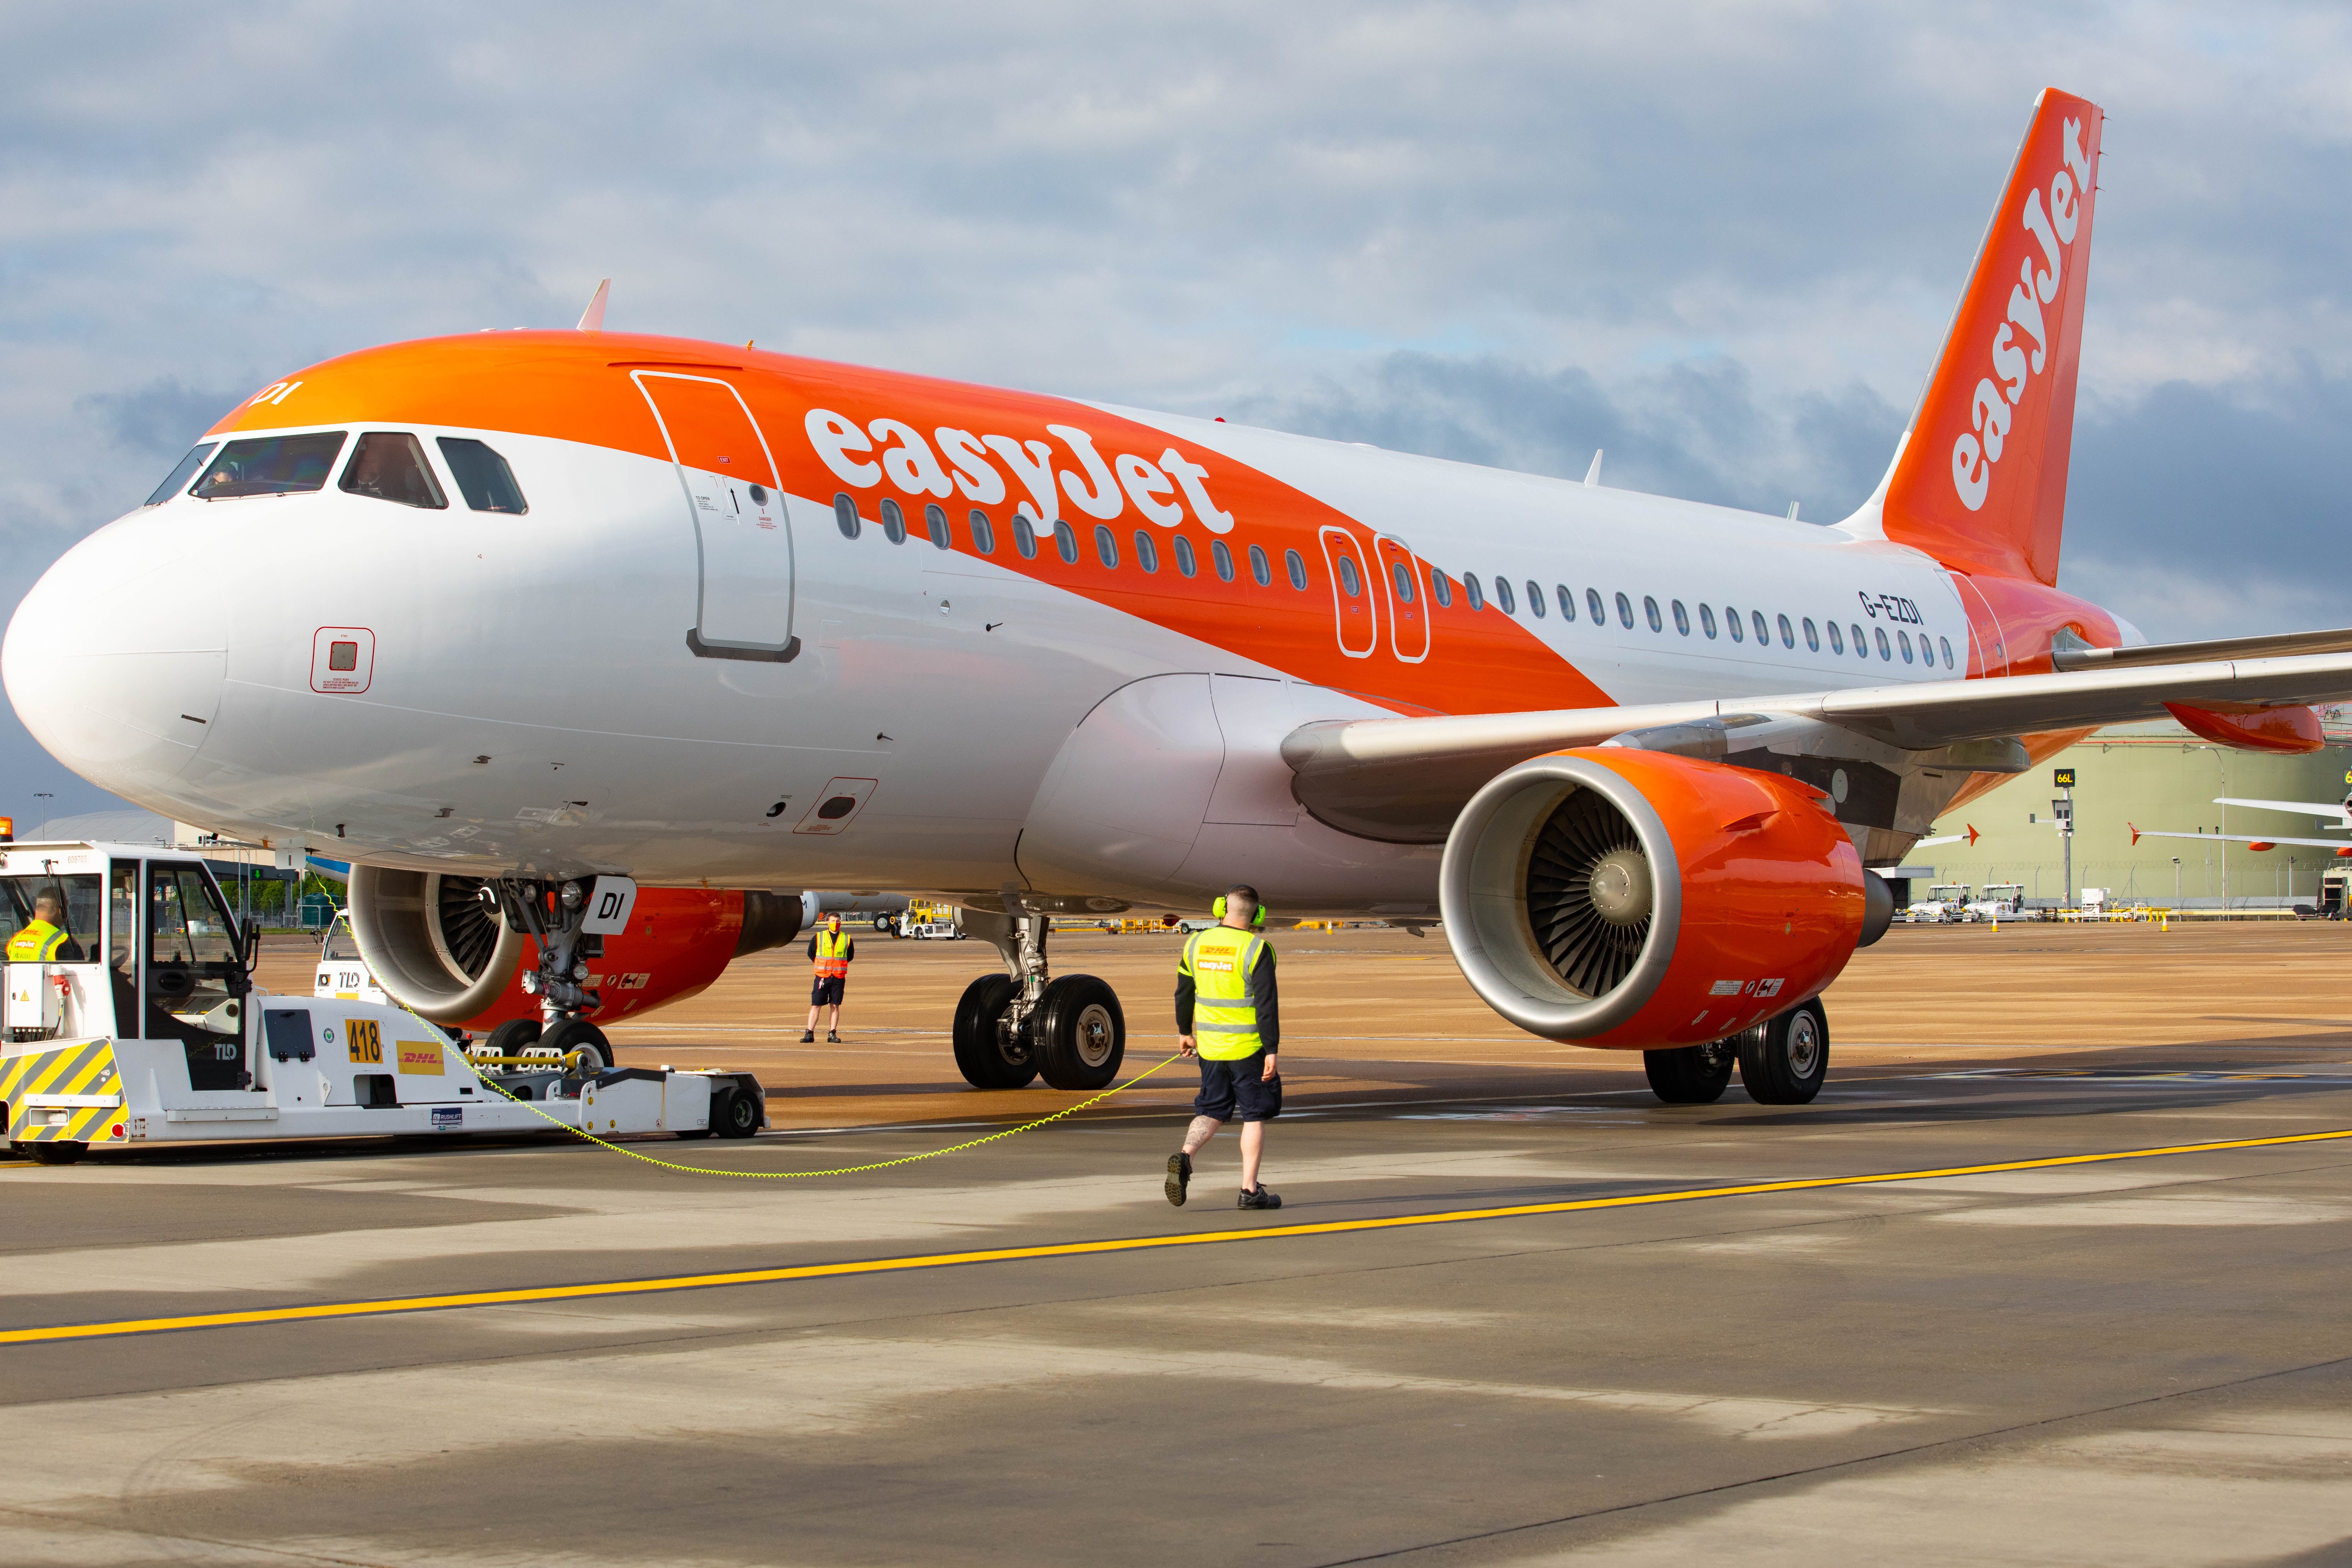 EasyJet and other airlines want to bounce back from the pandemic (David Parry/PA)